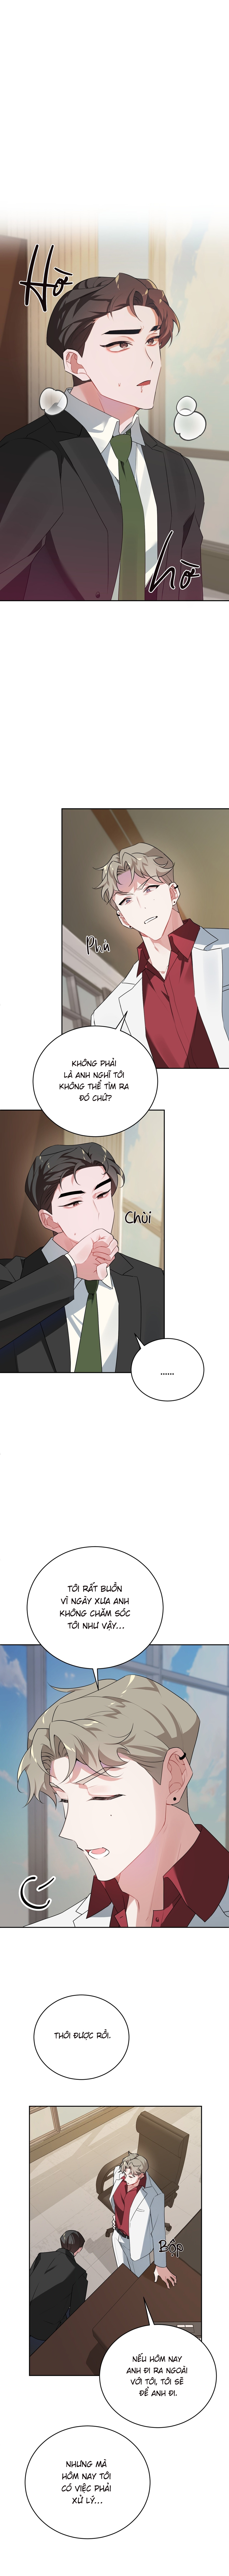 immoral-relationship-chap-4-0